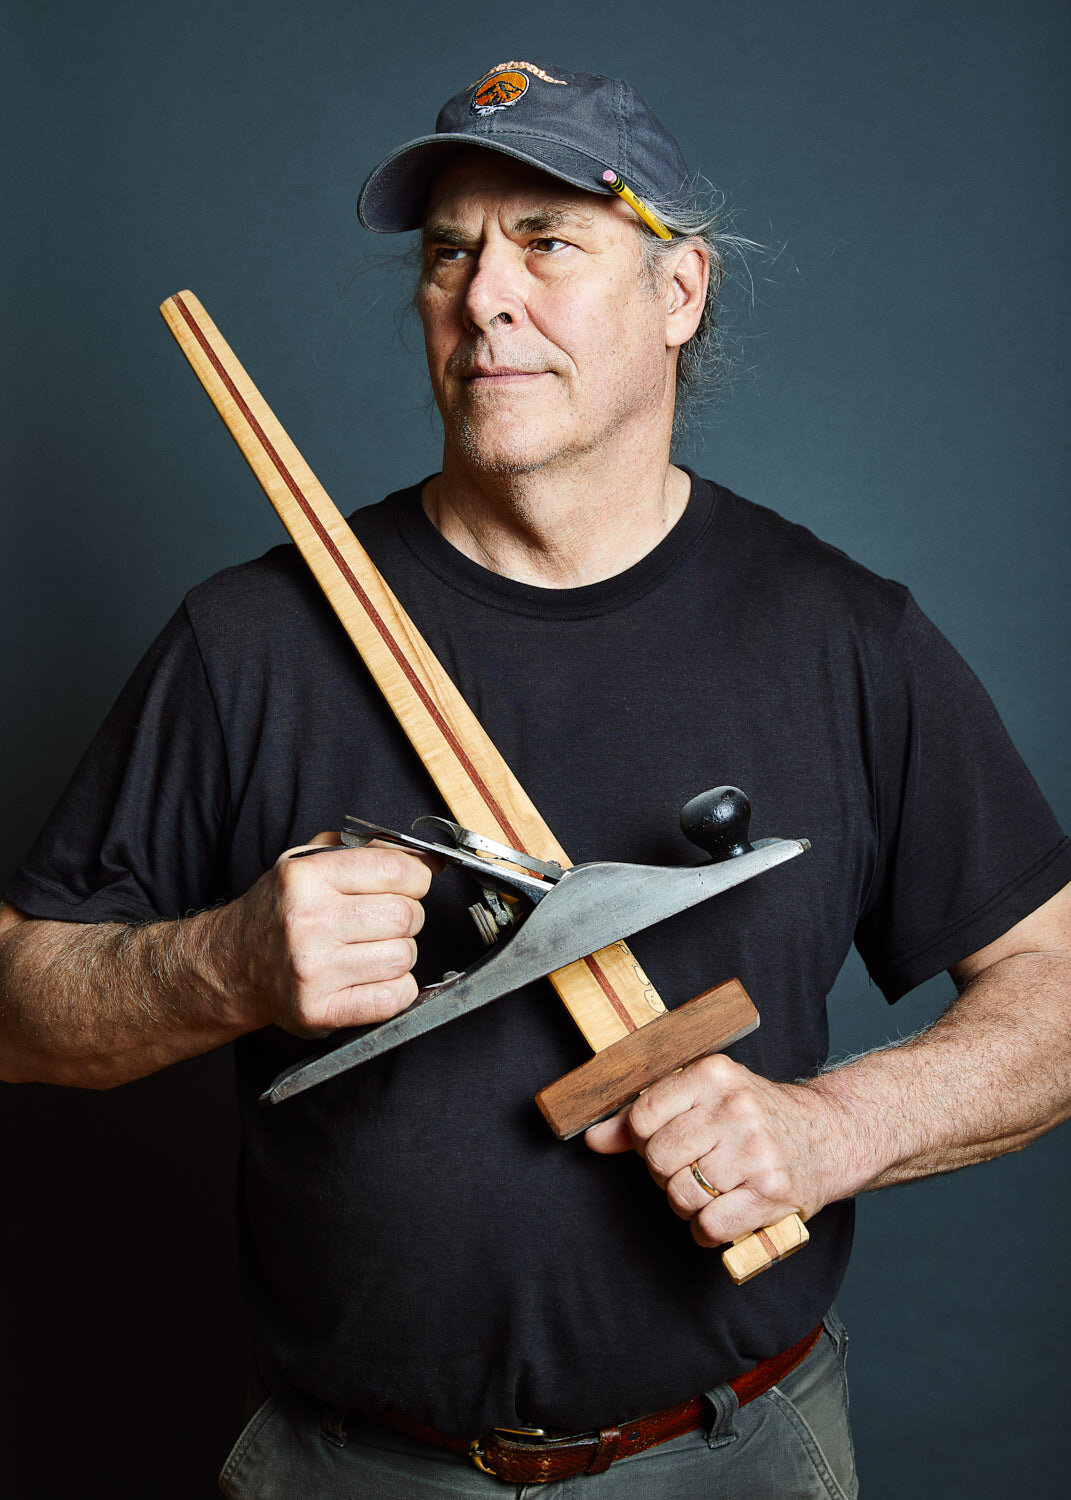 portrait of woodworker holding wooded sword and hand plane